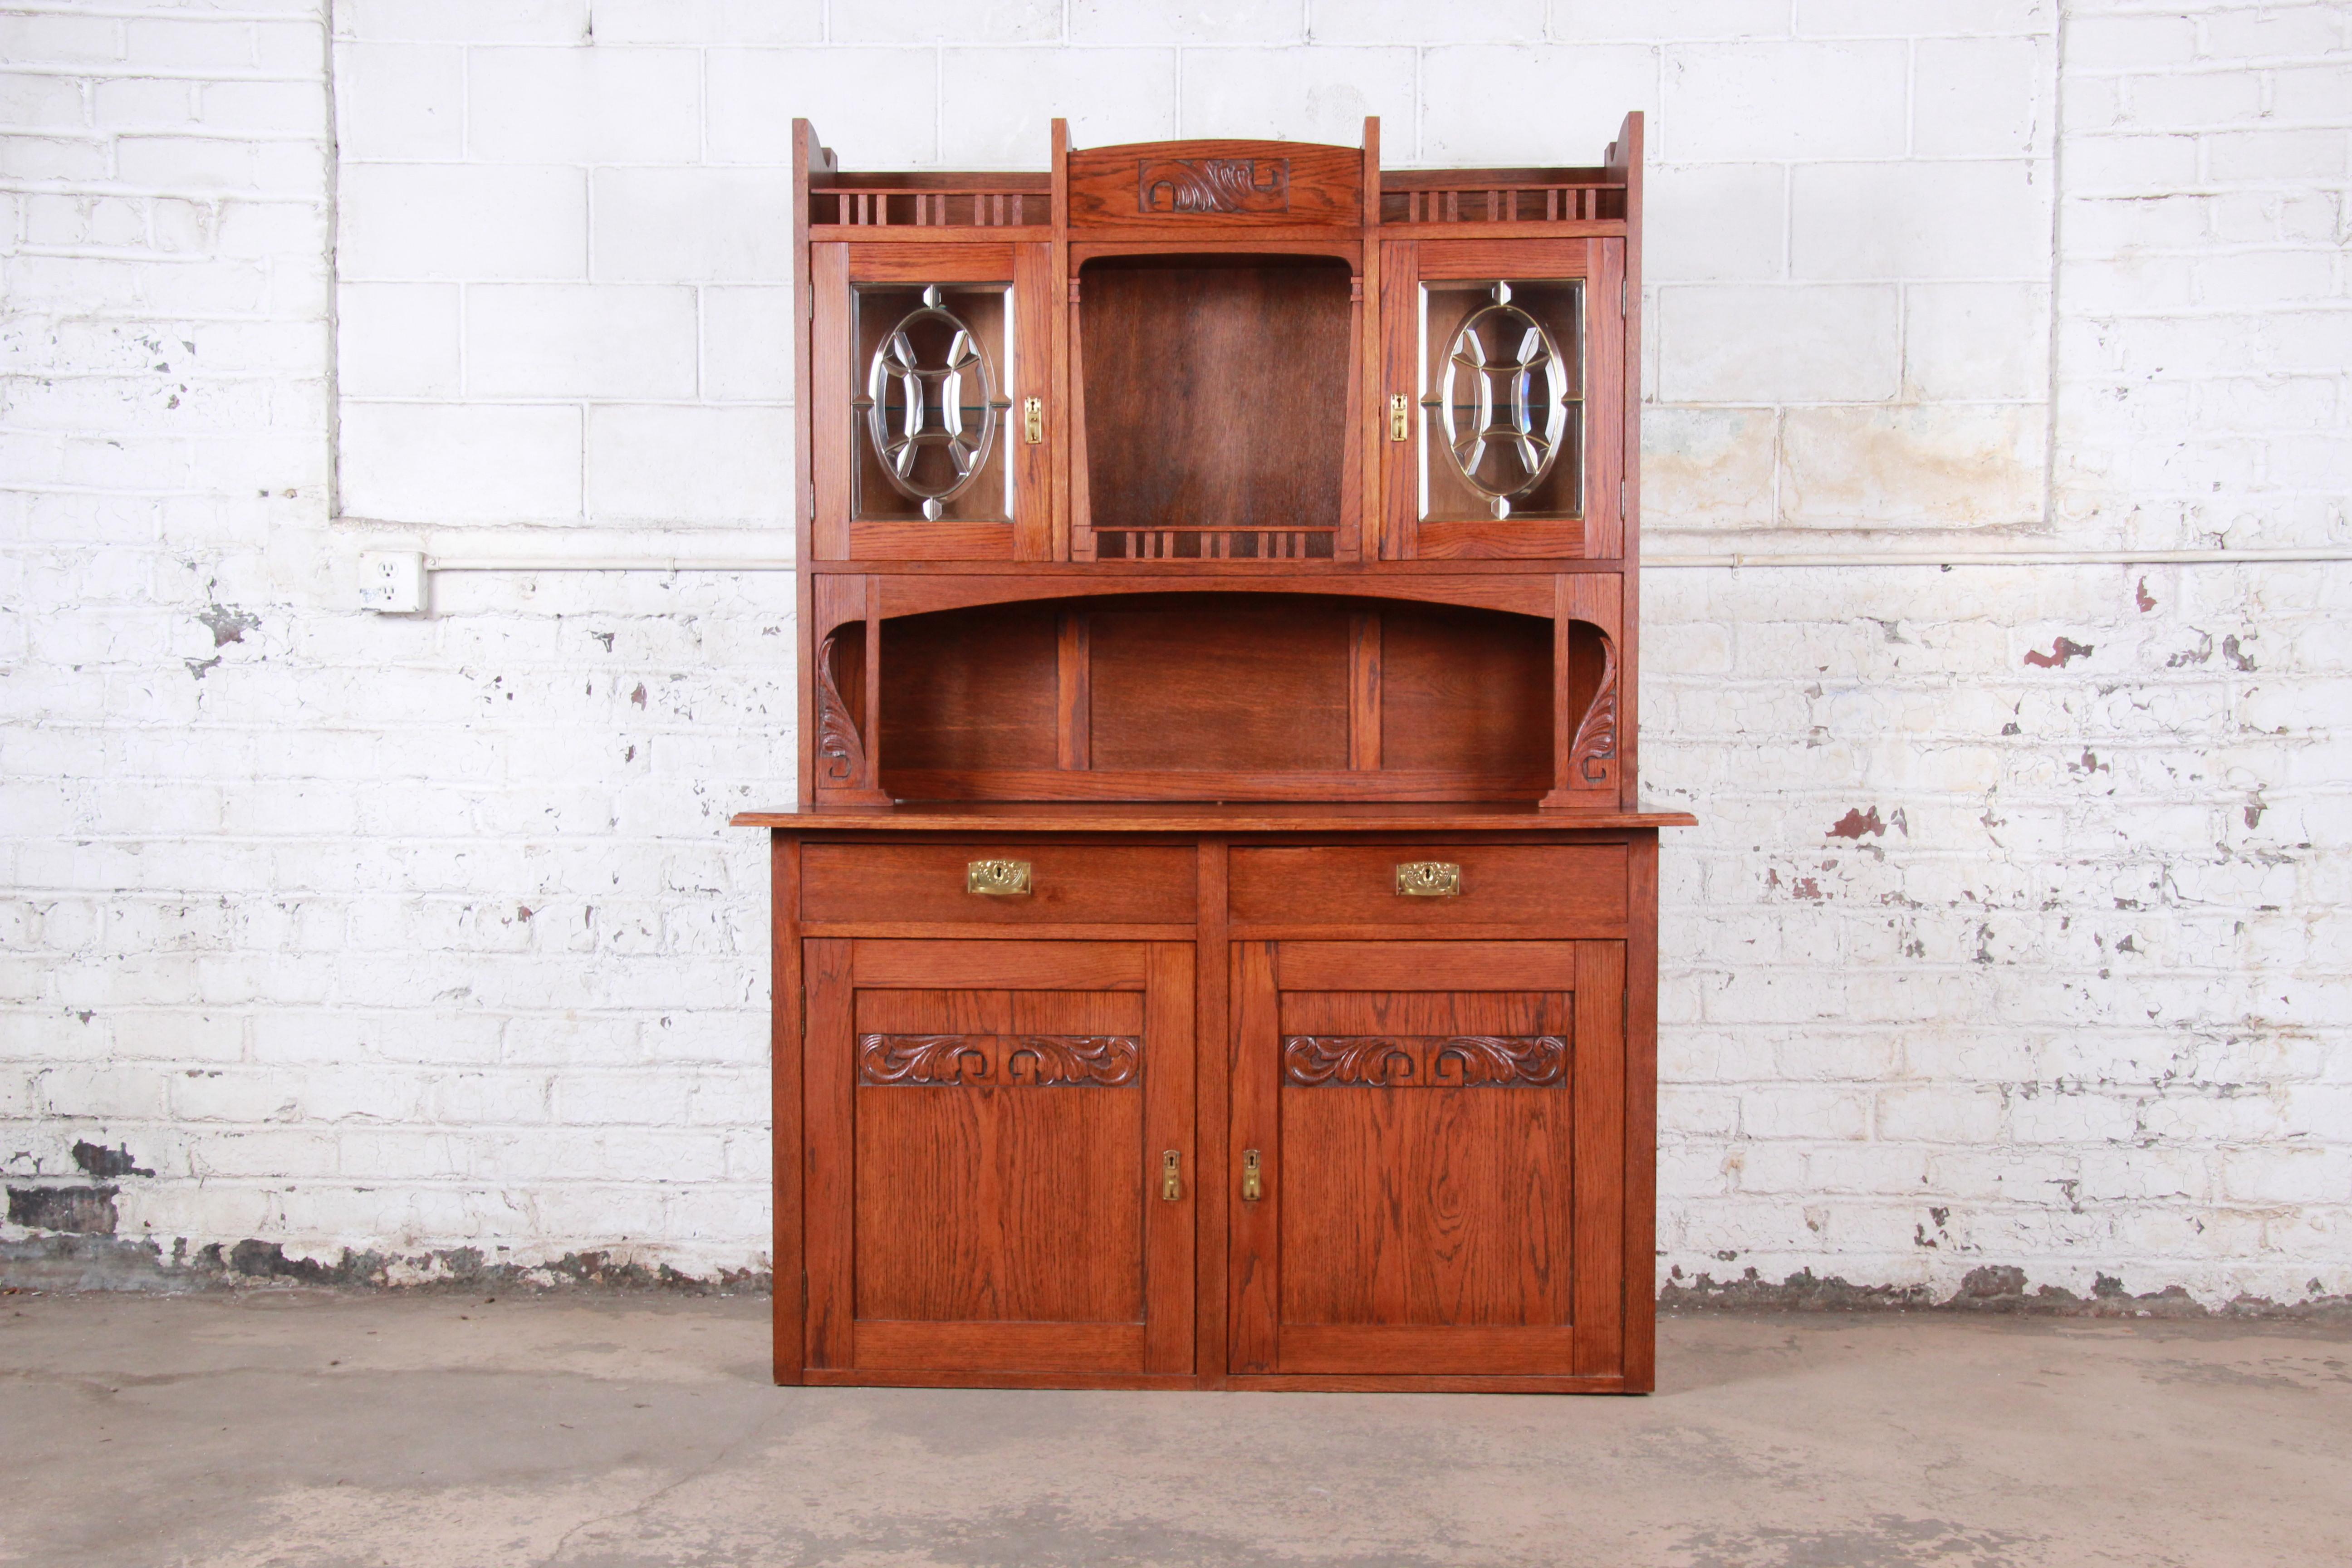 An exceptional Arts & Crafts carved oak bar cabinet or sideboard with hutch

USA, mid-20th century

Solid carved oak + beveled glass + brass hardware

Measures: 55